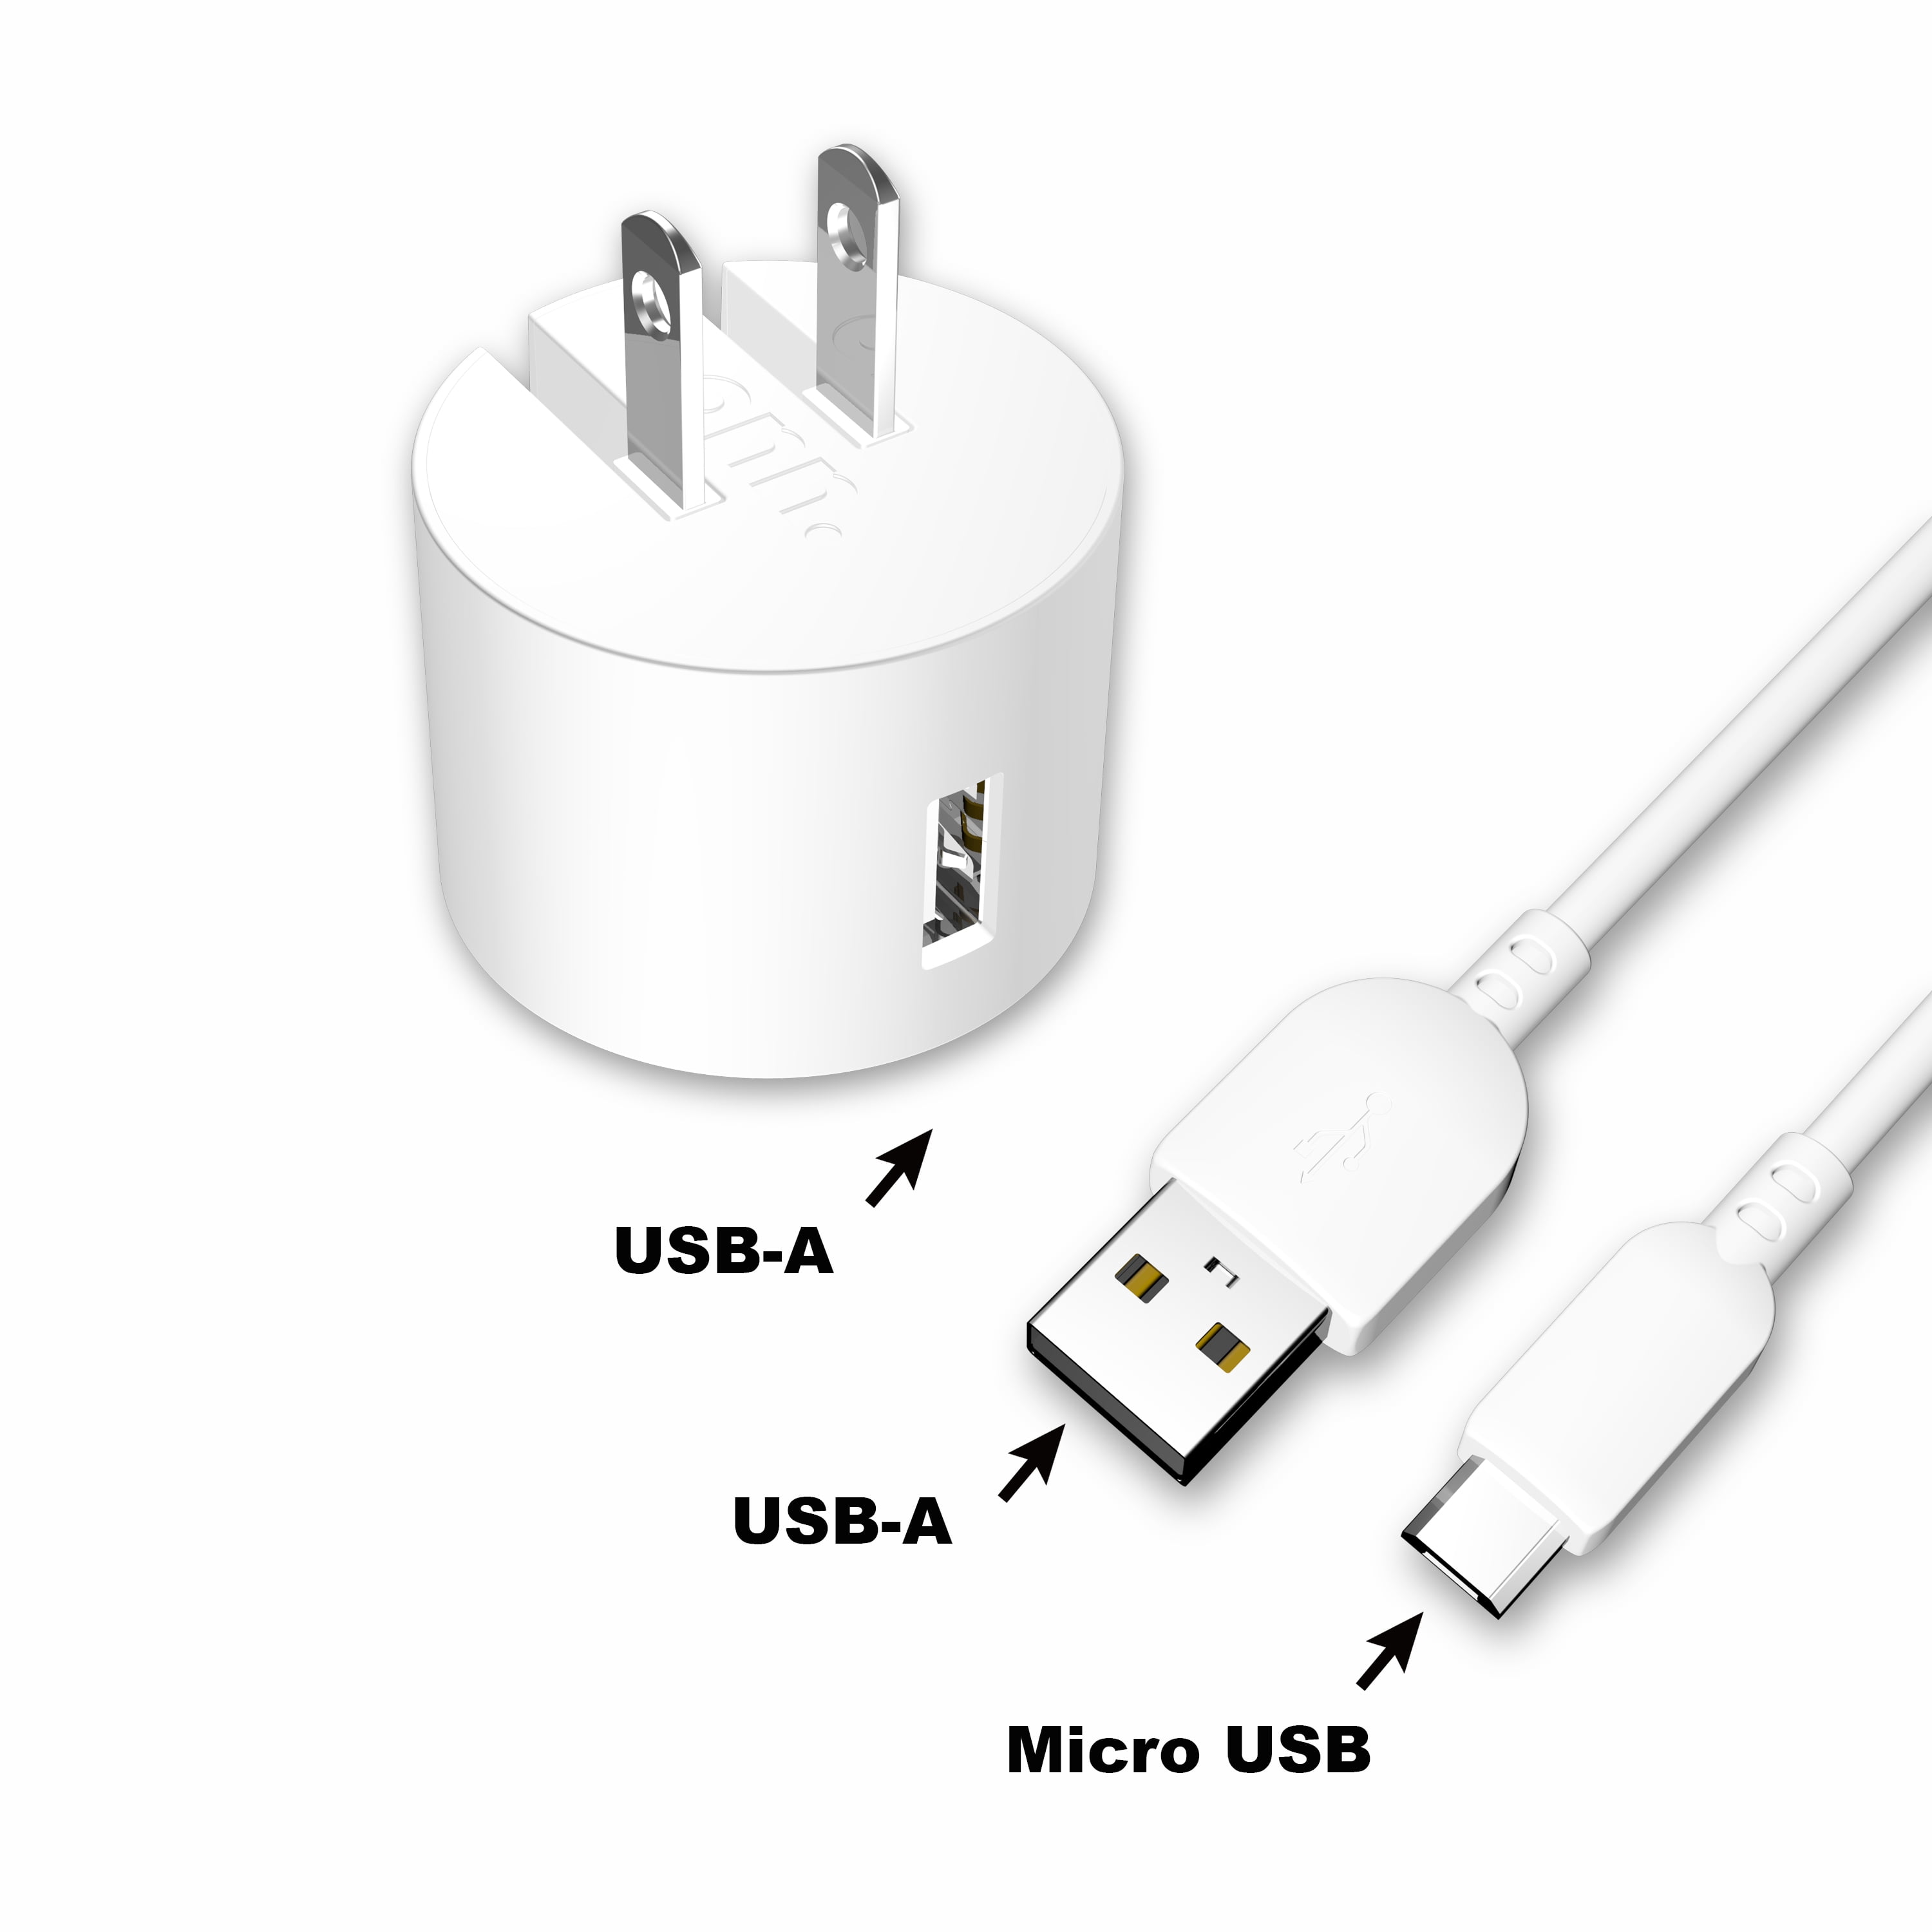 Multi Charging Cable Portable 3 in 1 Itachi USB Cable USB Power Cords for Cell Phone Tablets and More Devices Charging 